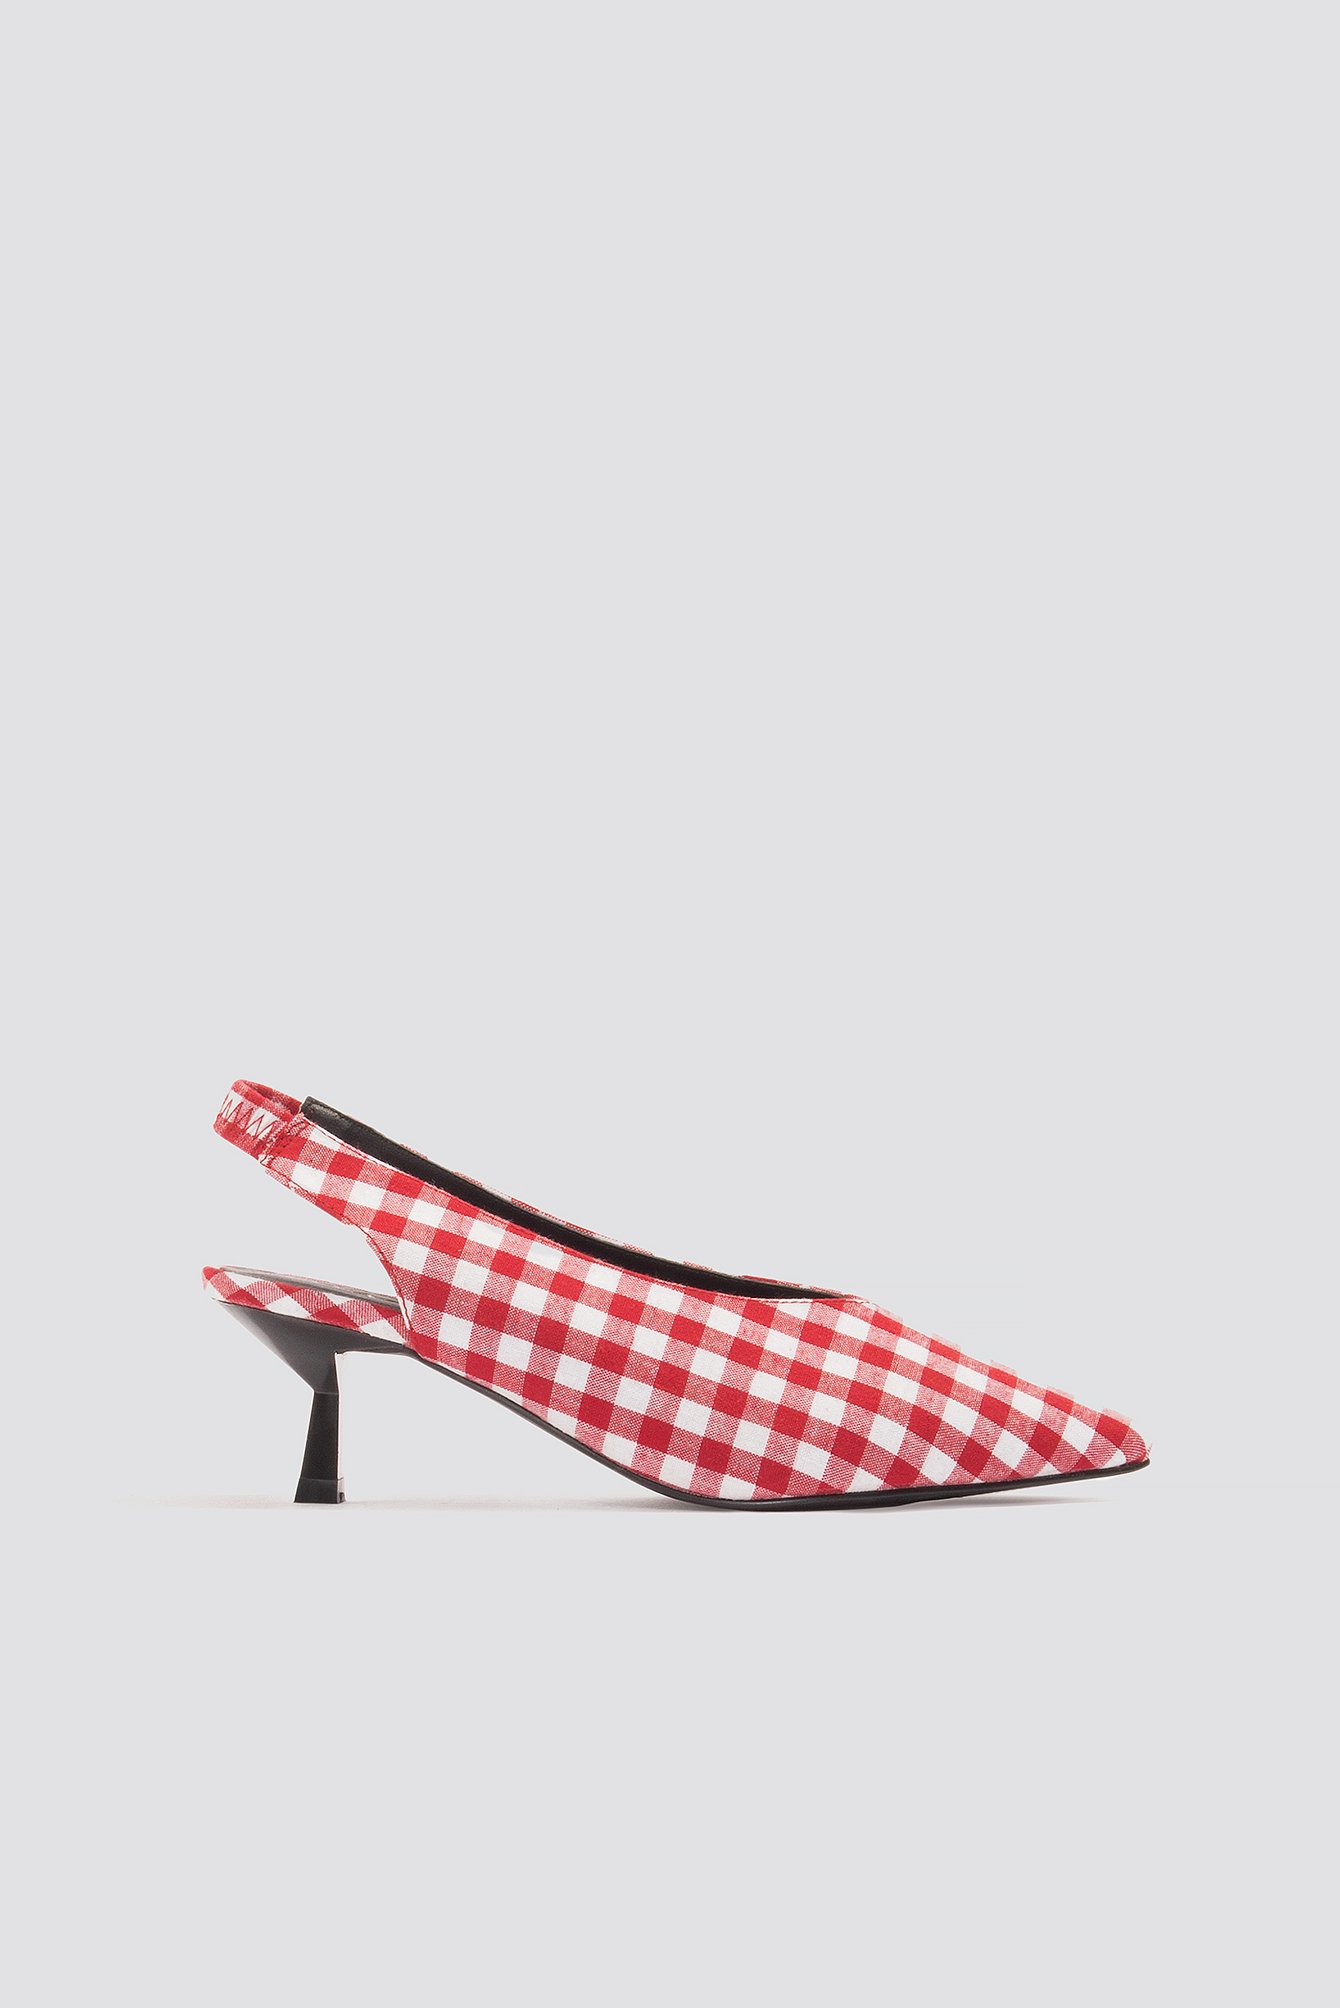 NA-KD Shoes Gingham Kitten Heel Pumps - Red,Multicolor